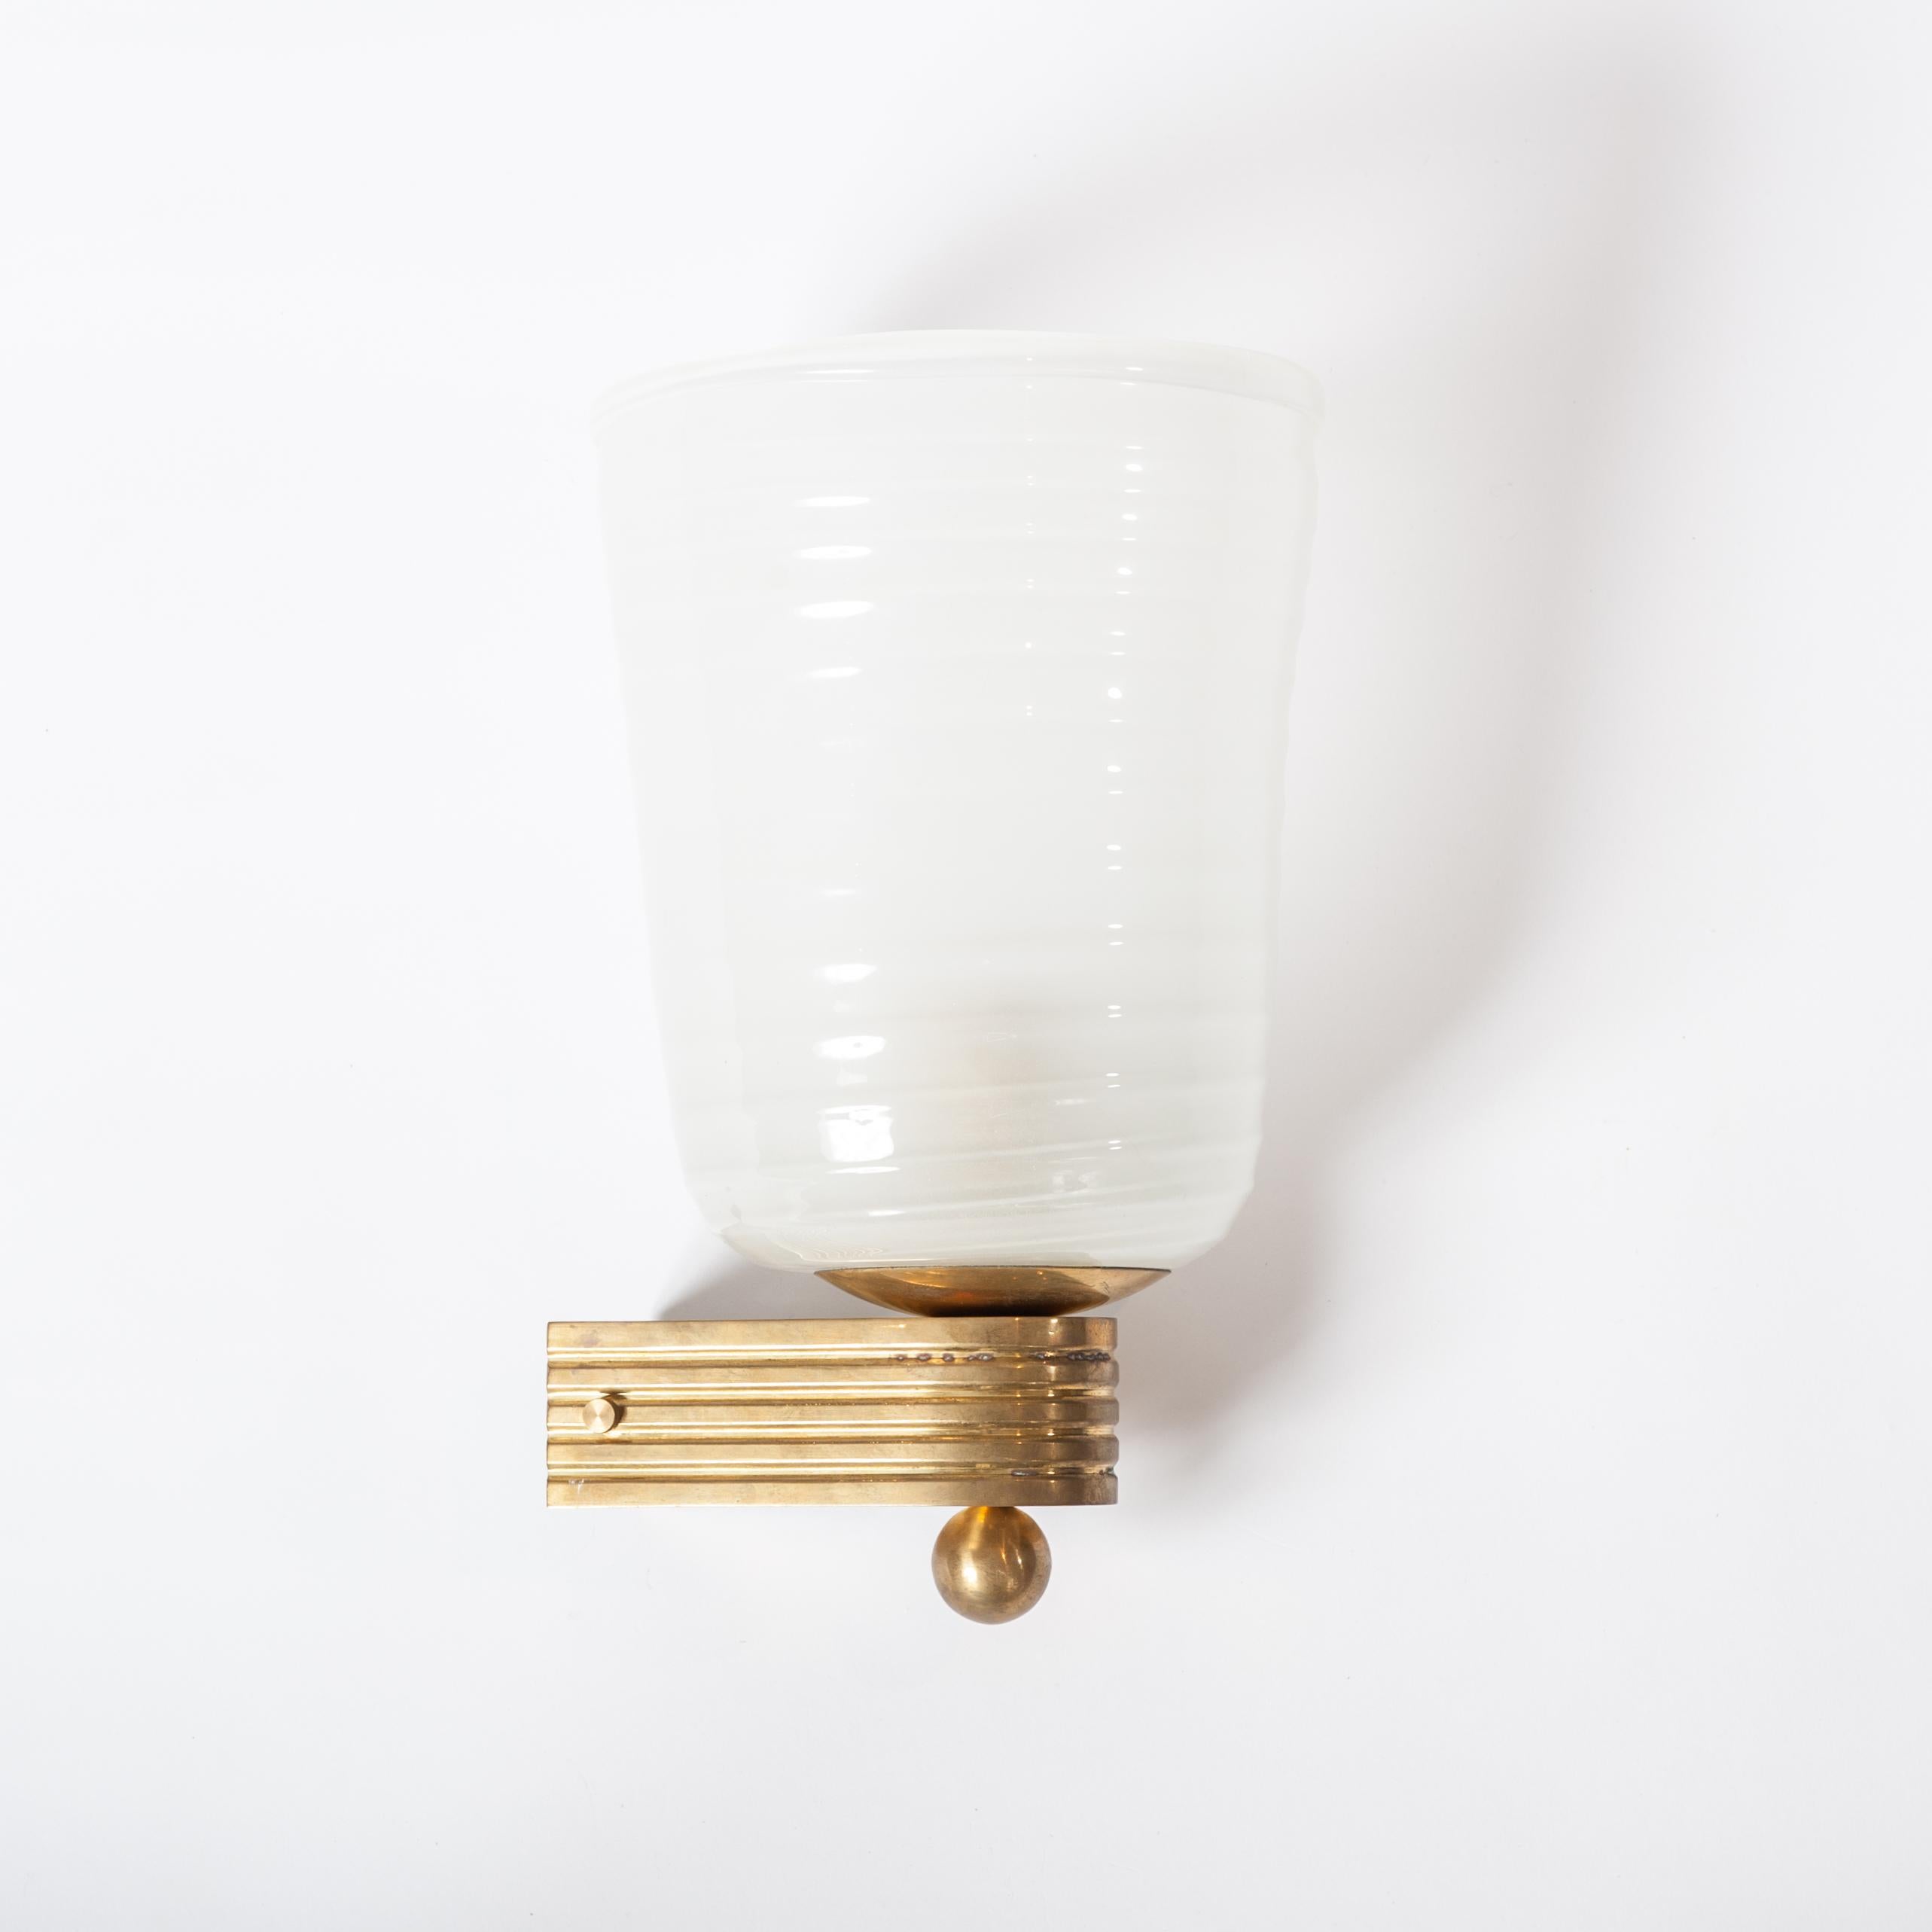 These sconces consist of 2 parts the conic shaped frosted Murano glass shade and the brass mount.
Both parts show a ribbed structure.
The glass has no defects, the brass has a wonderful patina.
(Diameter glass shade above 21cm x below 13cm x height